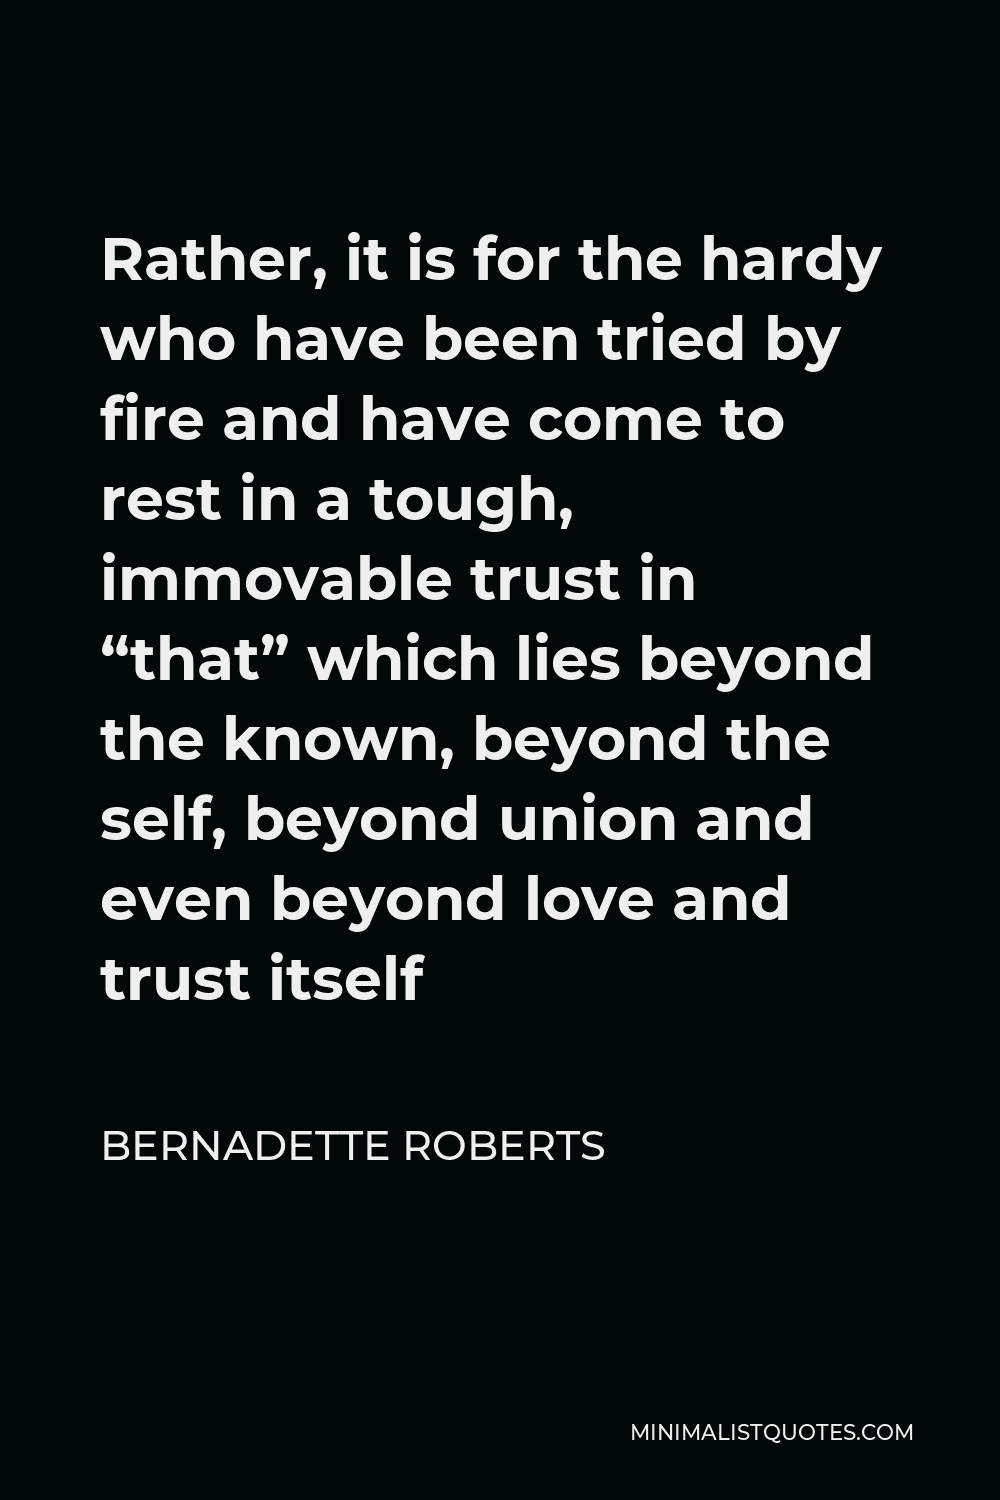 Bernadette Roberts Quote - Rather, it is for the hardy who have been tried by fire and have come to rest in a tough, immovable trust in “that” which lies beyond the known, beyond the self, beyond union and even beyond love and trust itself